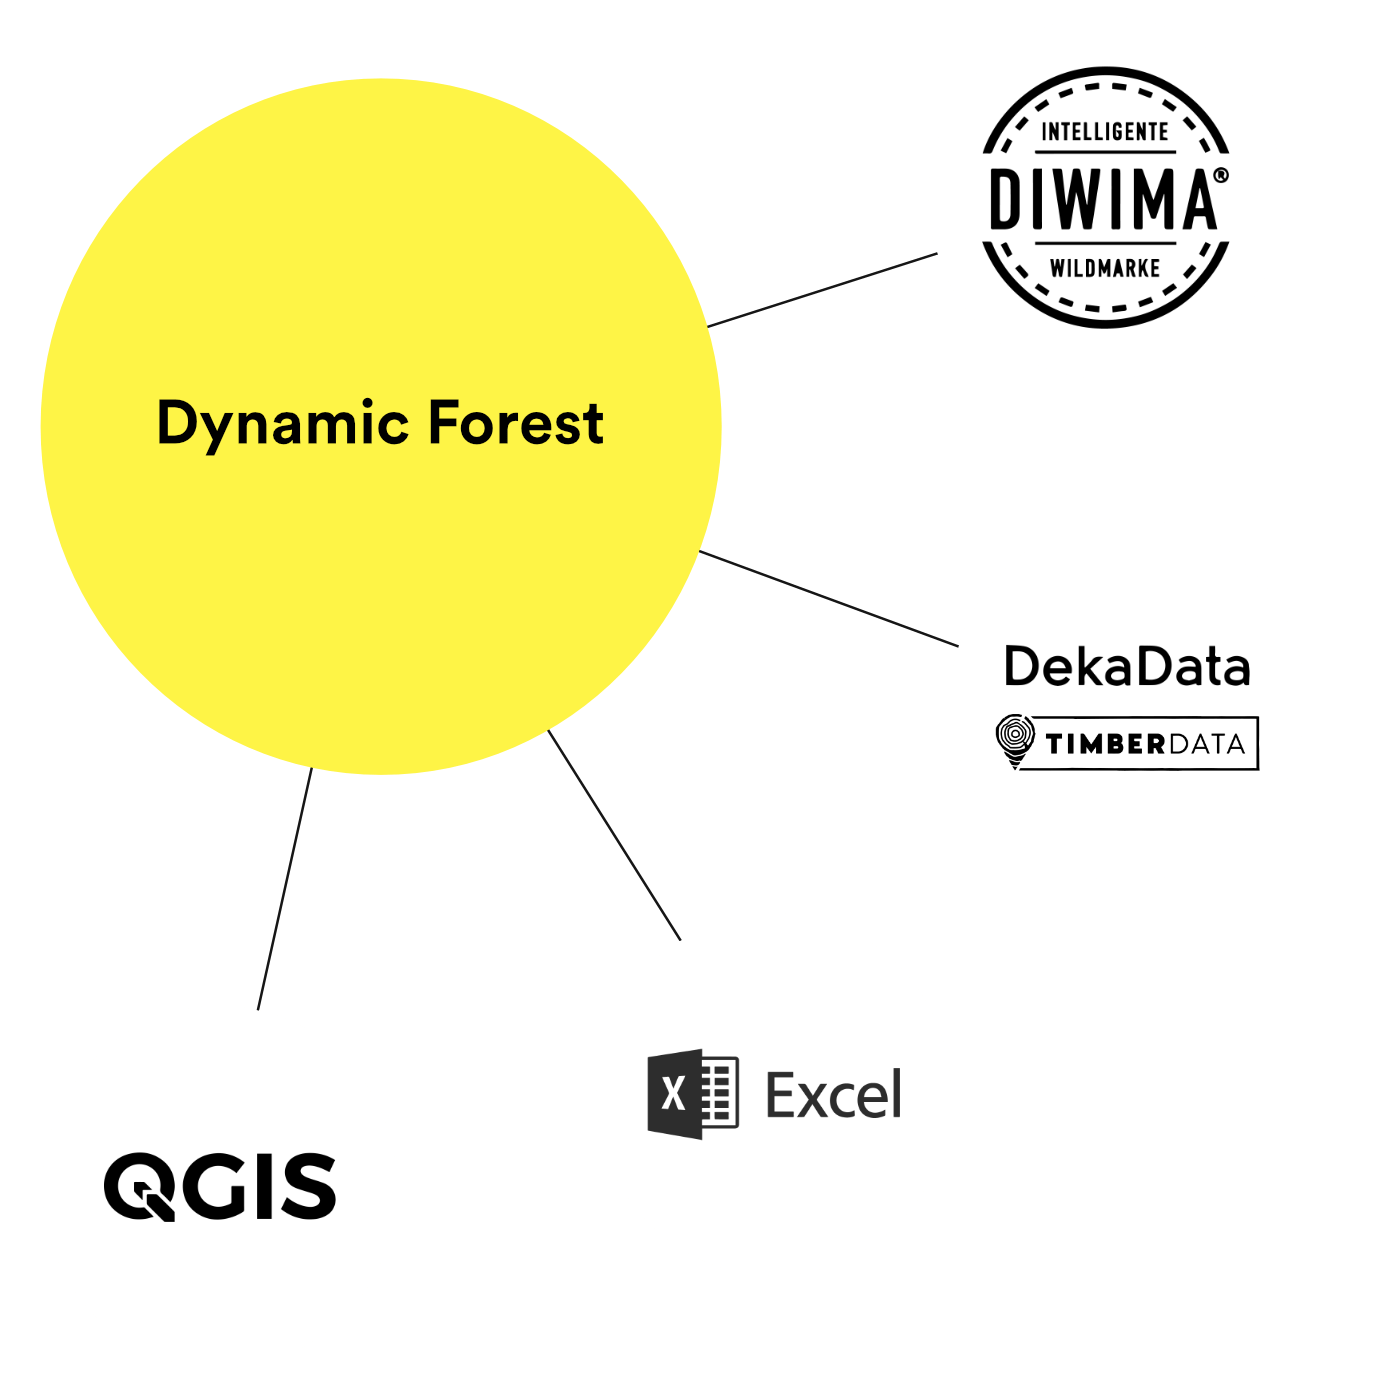 A graphic showing the Dynamic Forest network with connections to Diwima Intelligente Wildmarke, DekaData Timberdata, Excel, QGIS